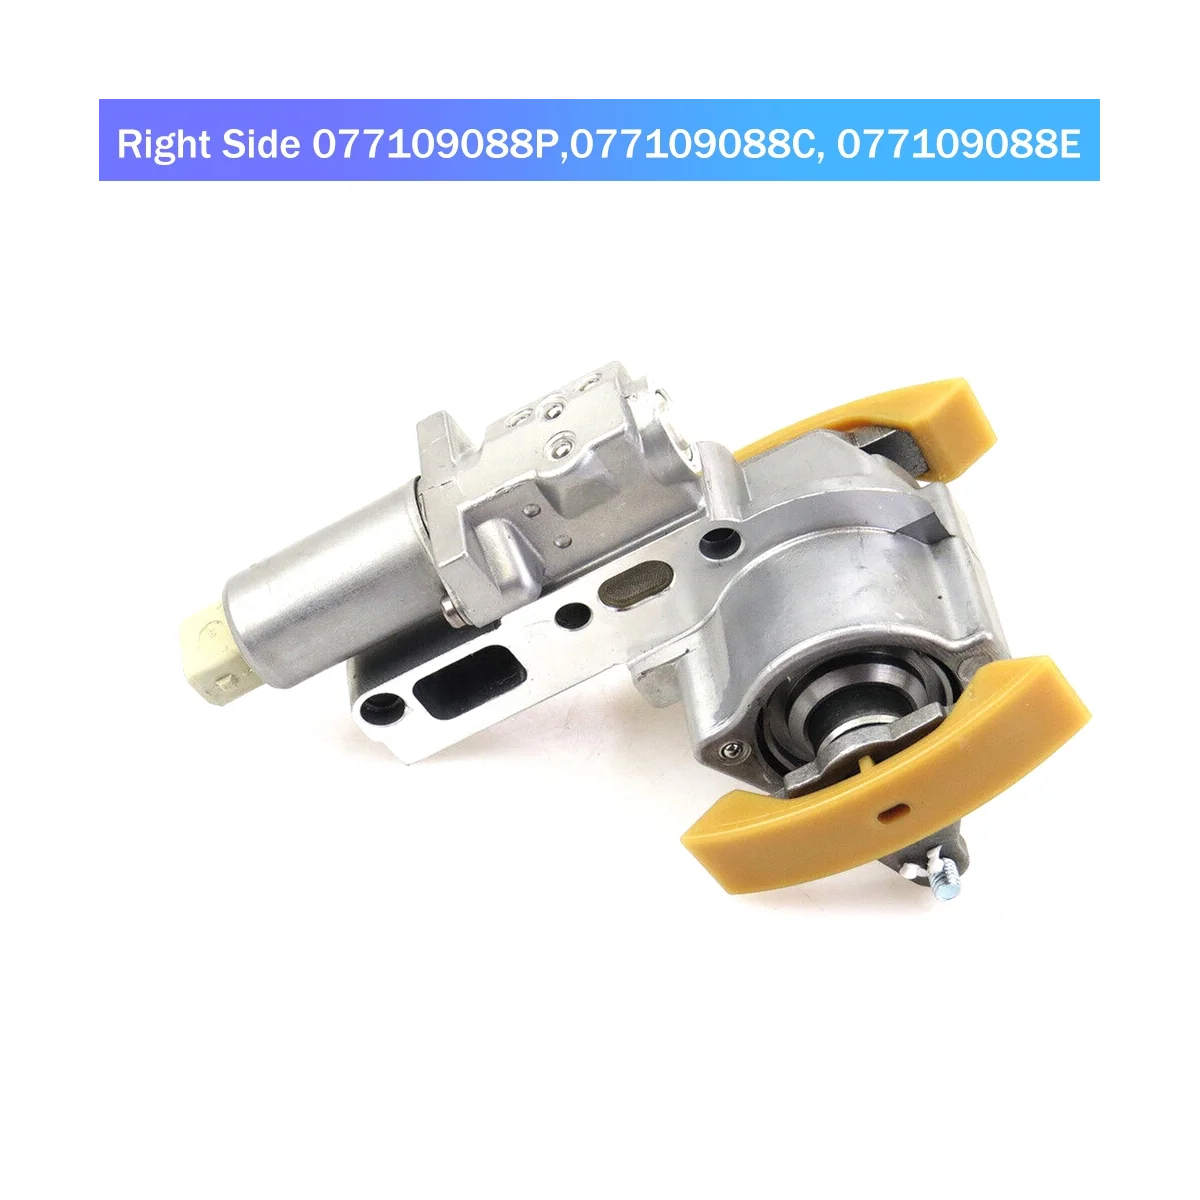 

Camshaft Tensioner Timing Chain Tensioner Right for VW Phaeton Touareg Audi A6 A8 4.2 077109088P, 077109088C, 077109088E